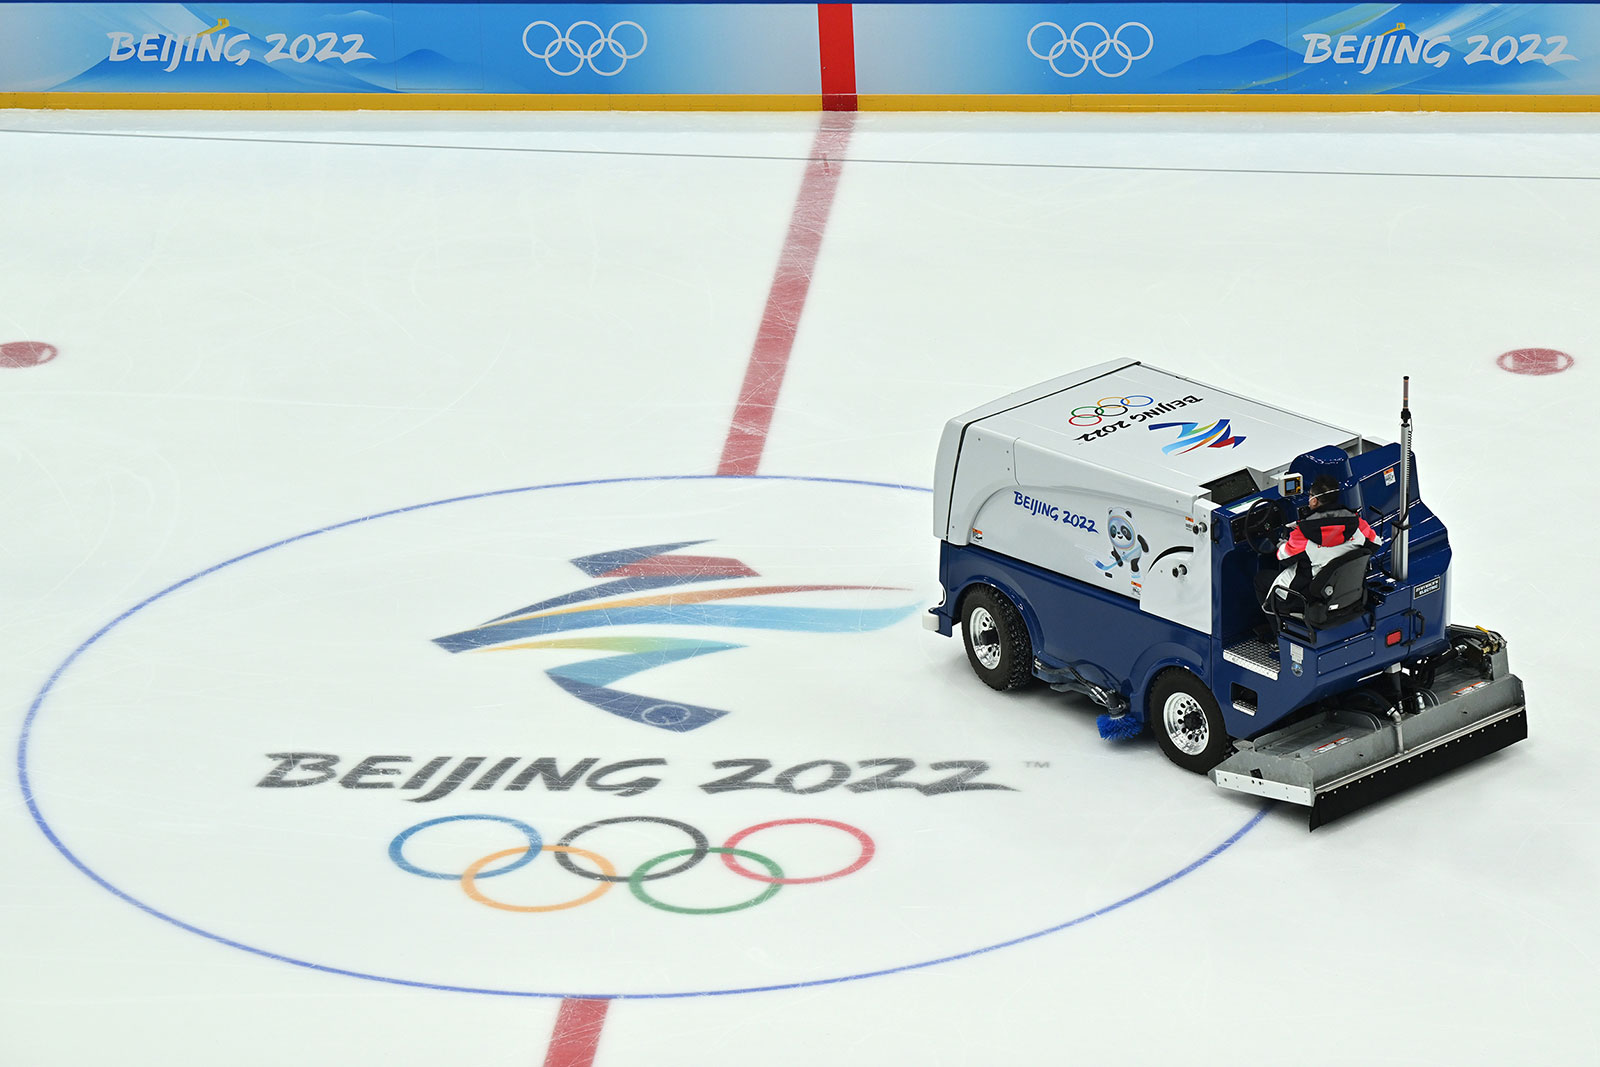 A worker drives a Zamboni ice resurfacing machine at the National Indoor Stadium in Beijing on January 31.